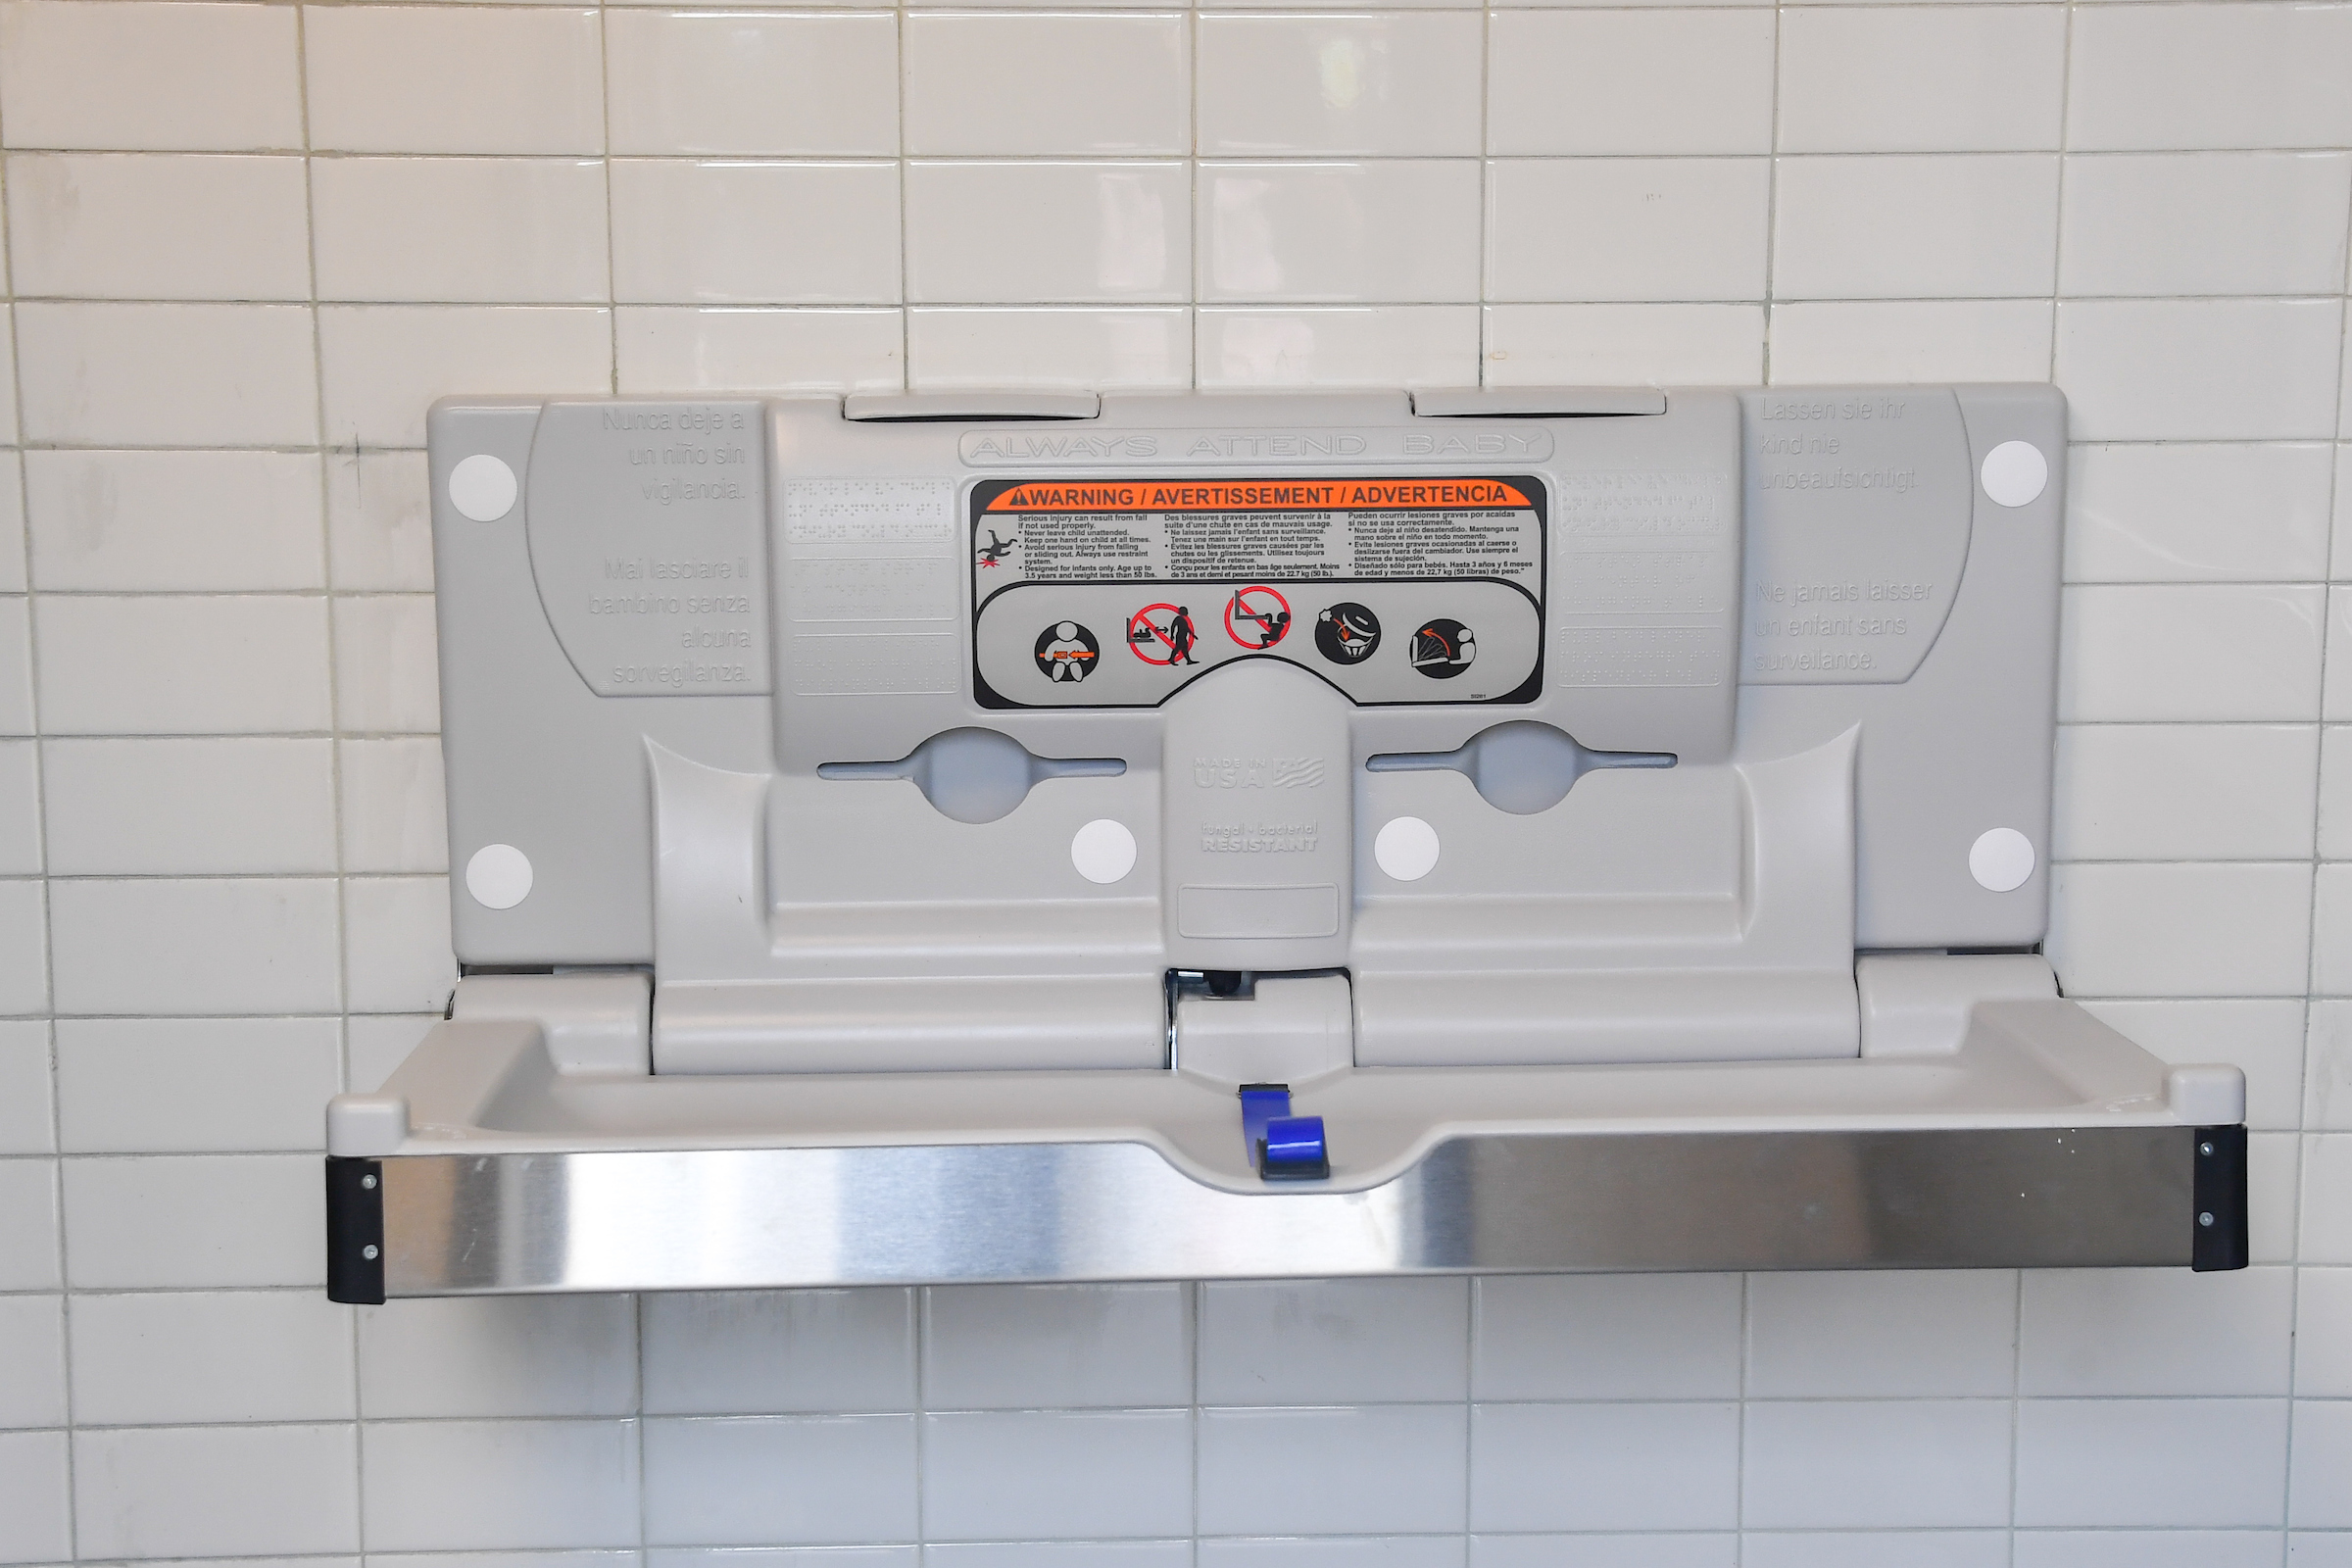 There are now over 1,200 baby diaper changing tables in NYC public bathrooms